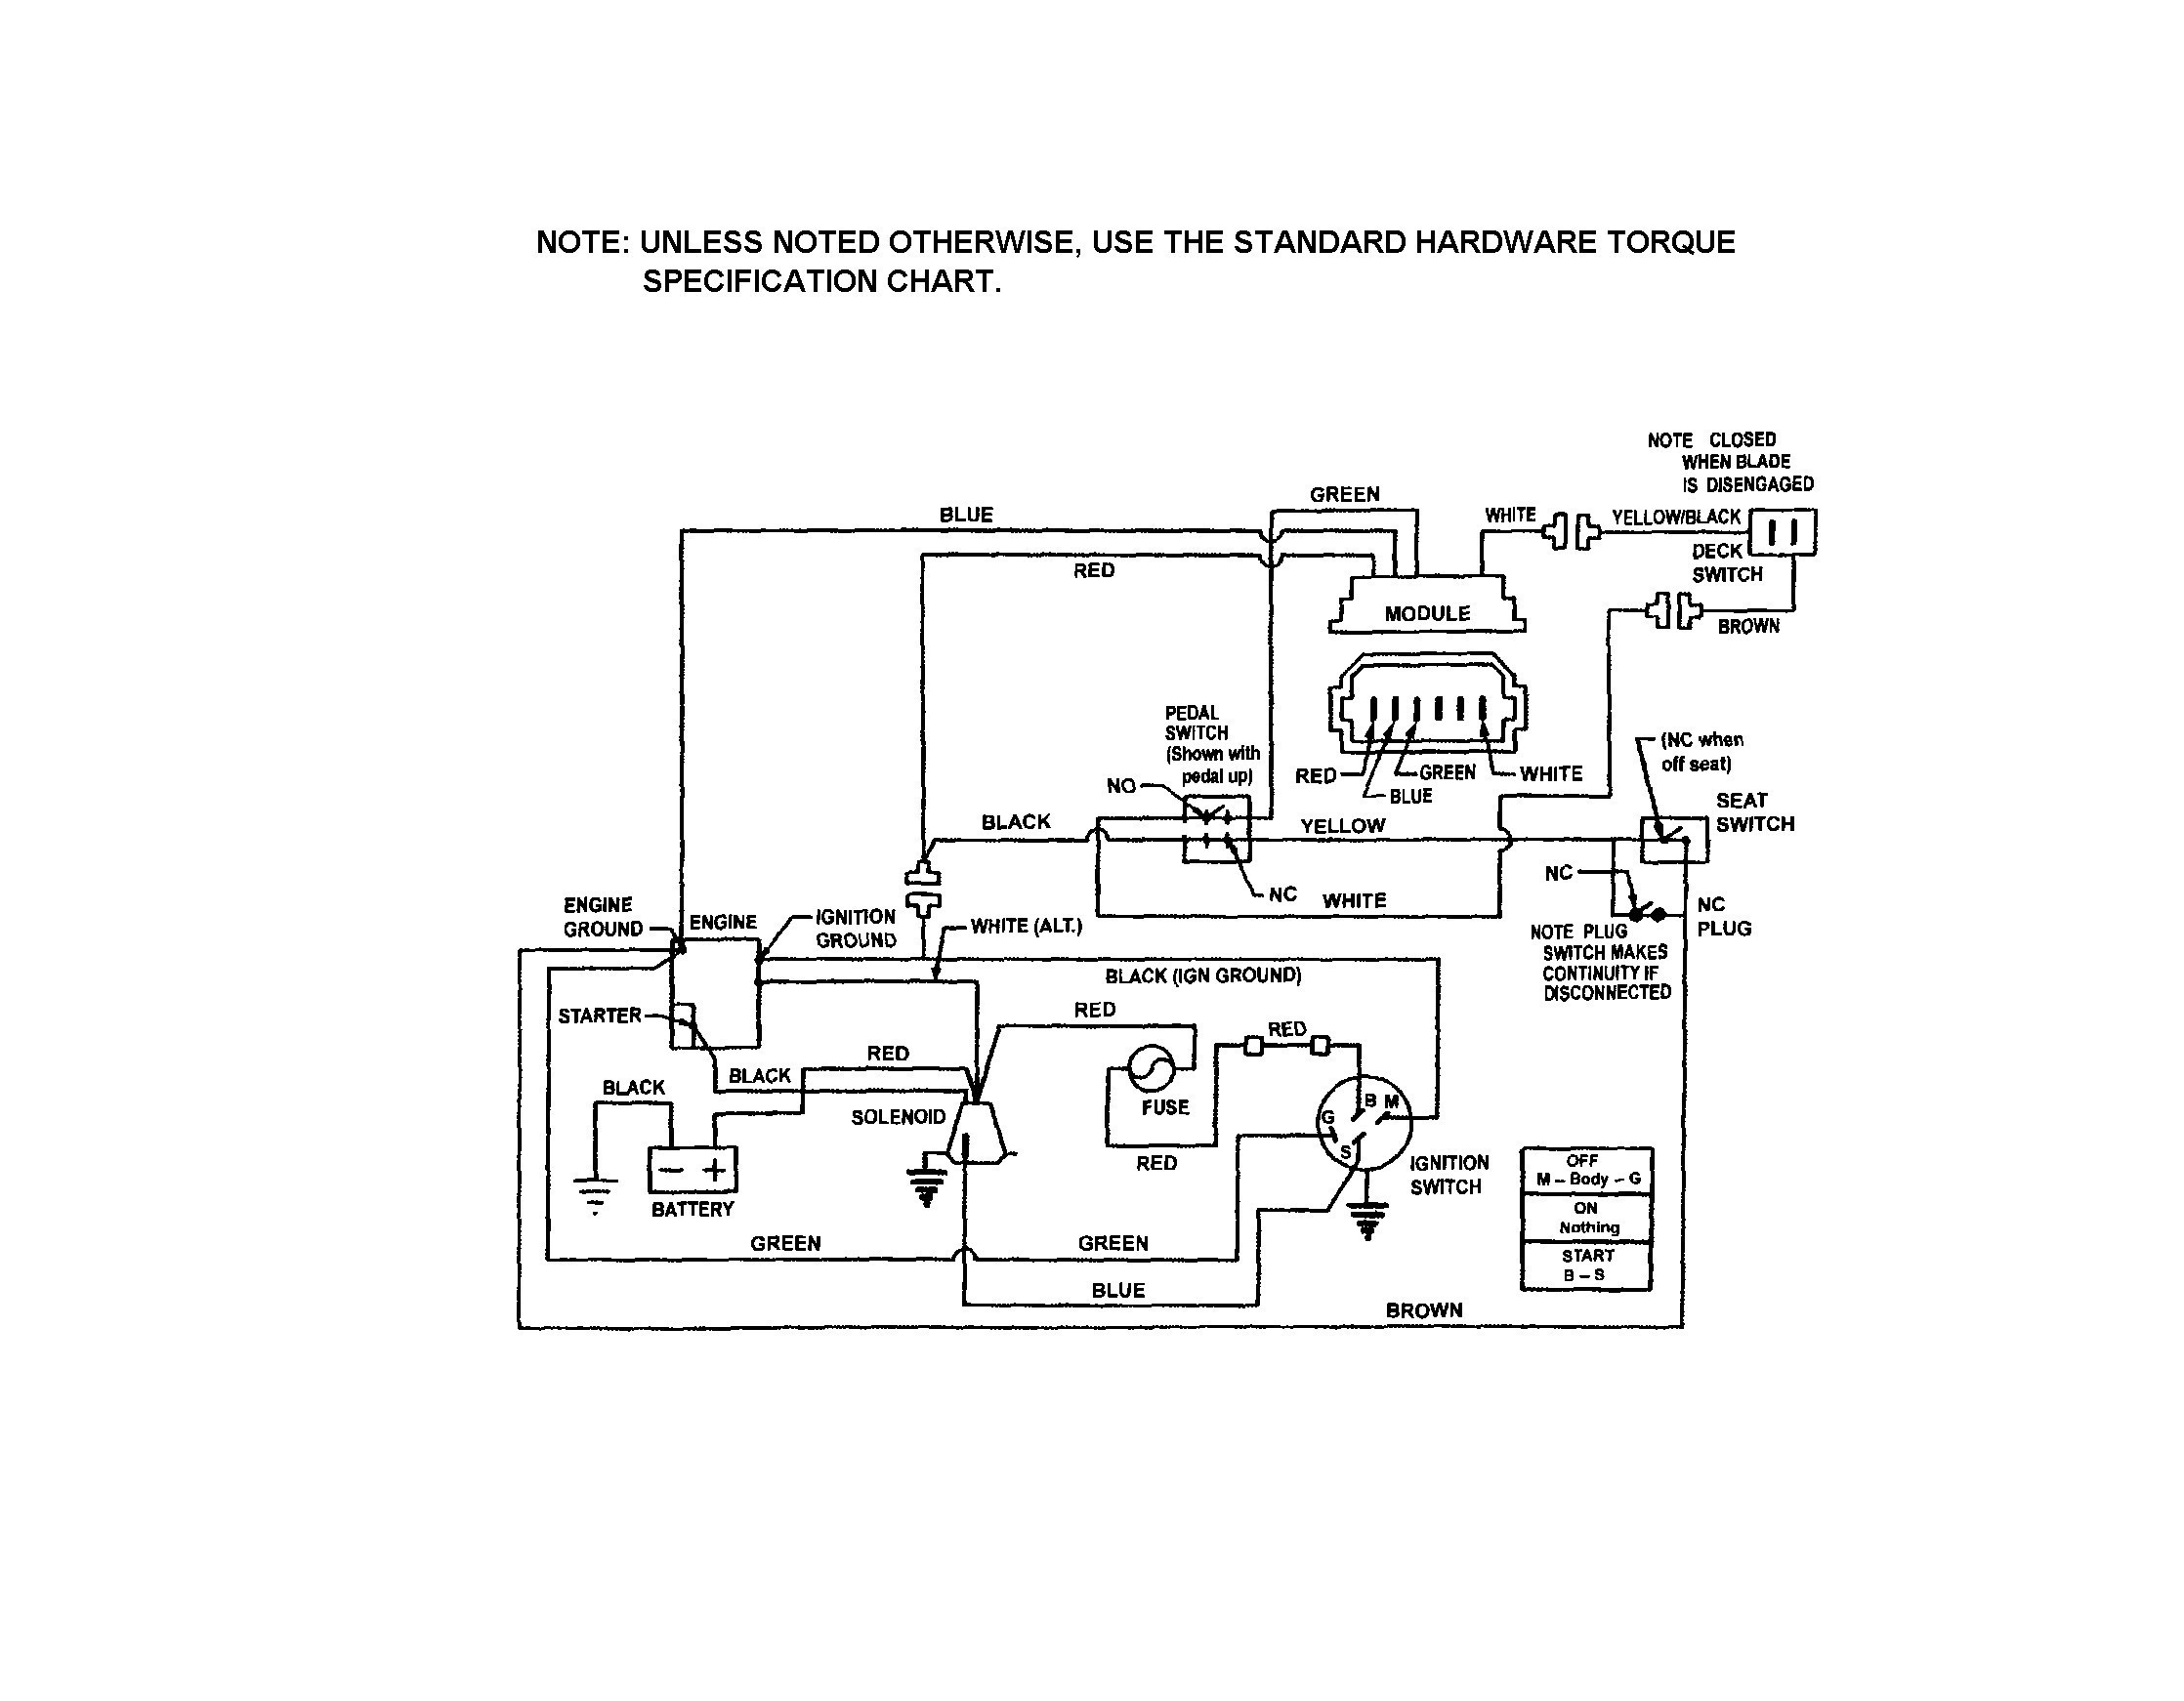 Briggs and Stratton Engine Troubleshooting Diagram Briggs and Stratton Ignition System Diagram Worksheet and Wiring Of Briggs and Stratton Engine Troubleshooting Diagram